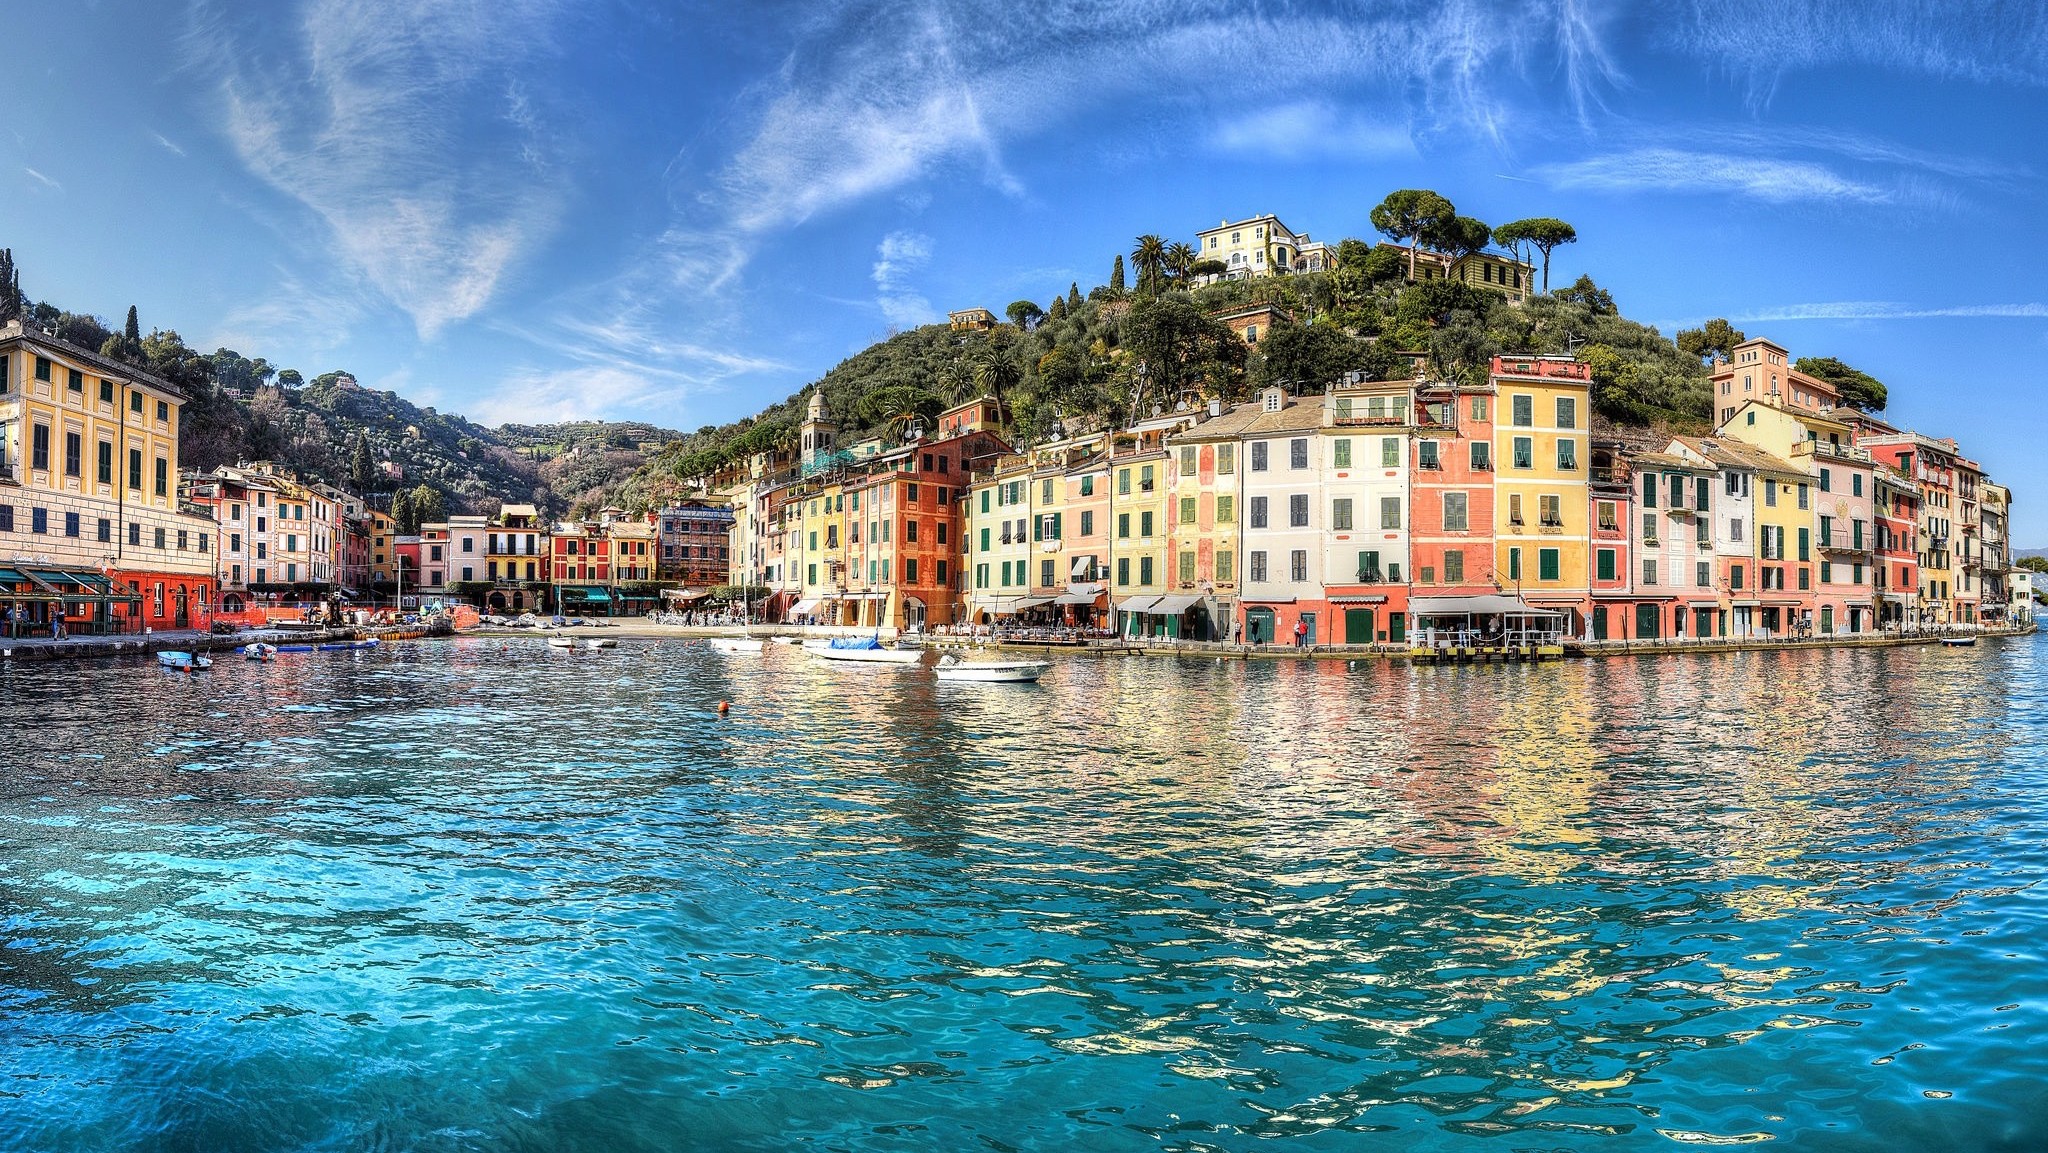 Top 10 most expensive and luxurious things to do in Italy on a